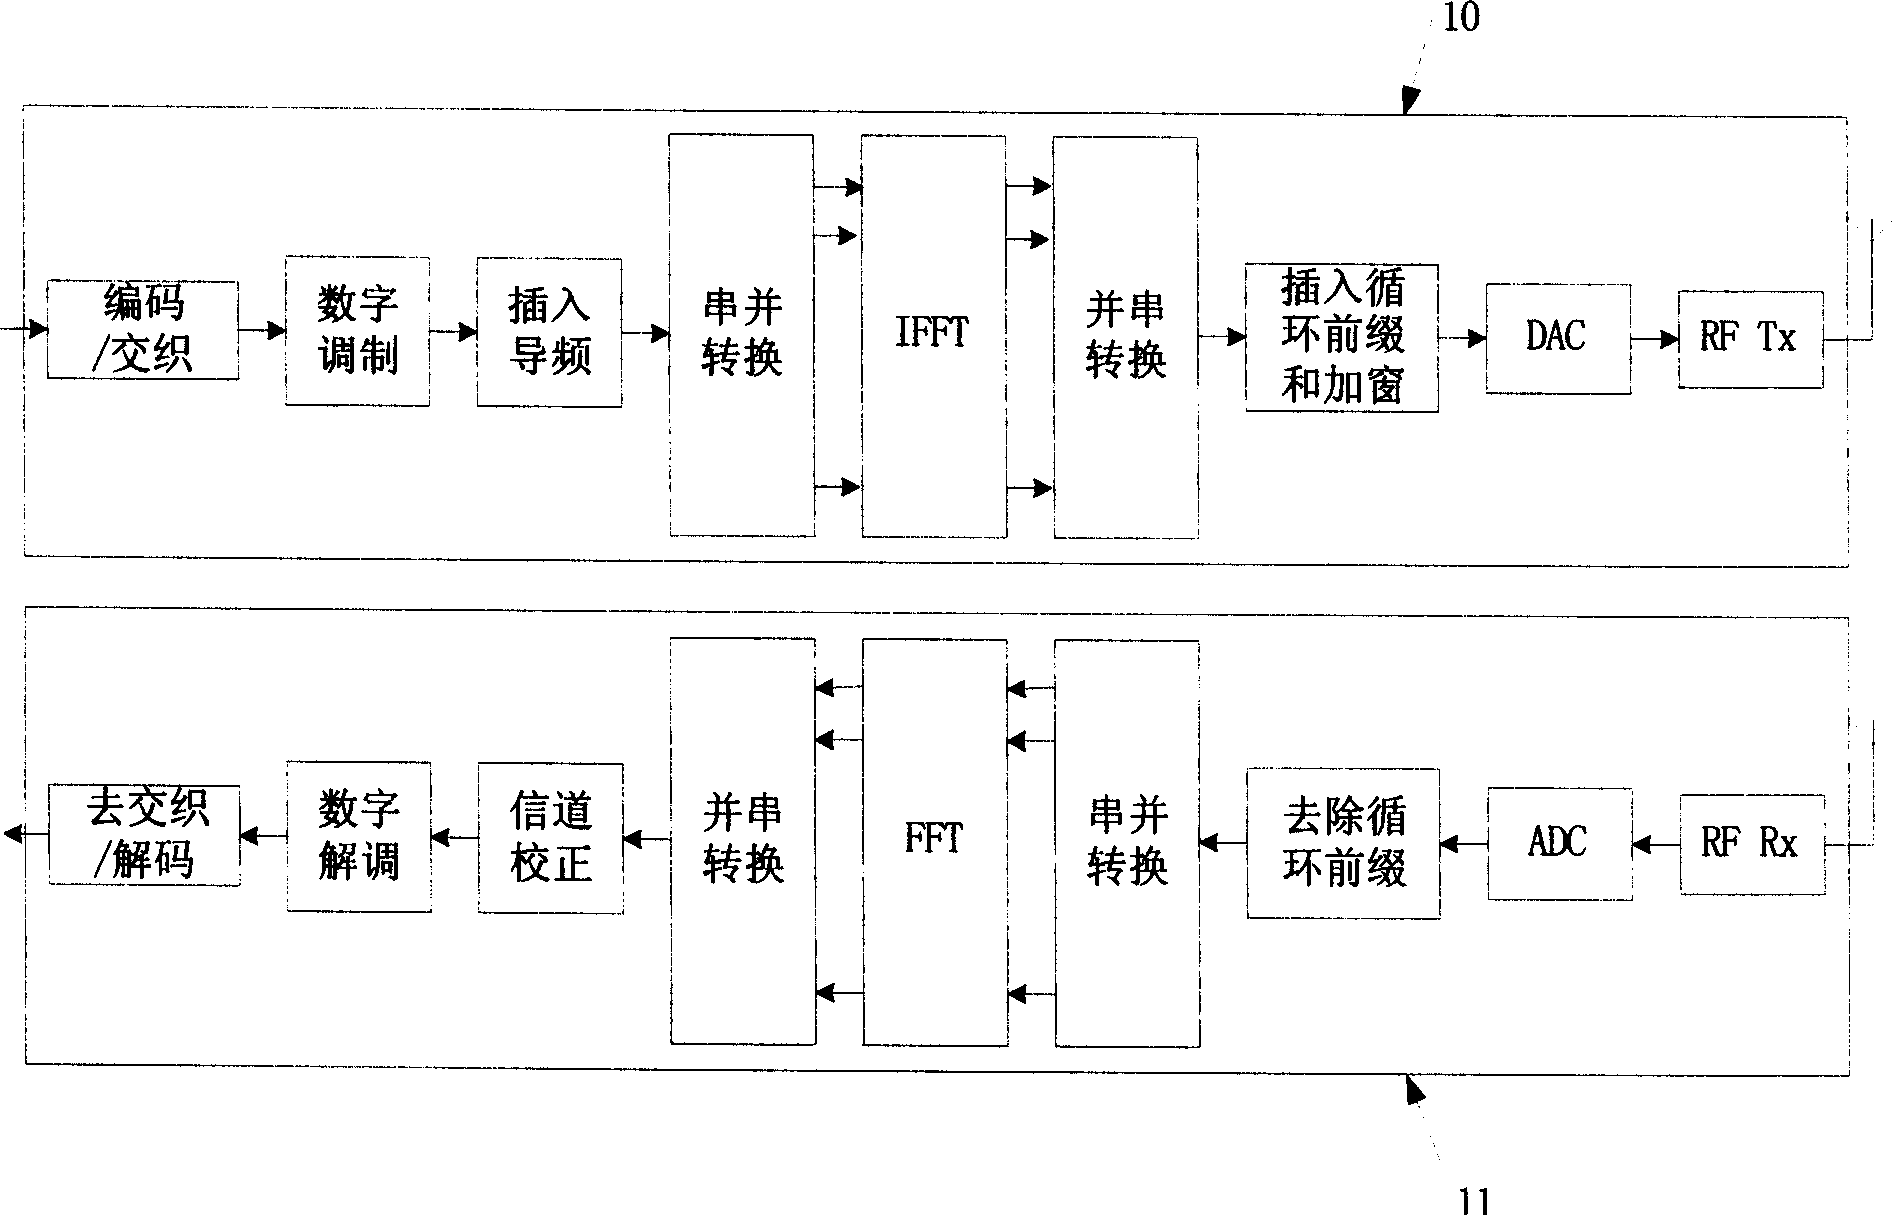 High-frequency-amplification station for supporting time division duplex operation mode in orthogonal frequency division multiplexing system